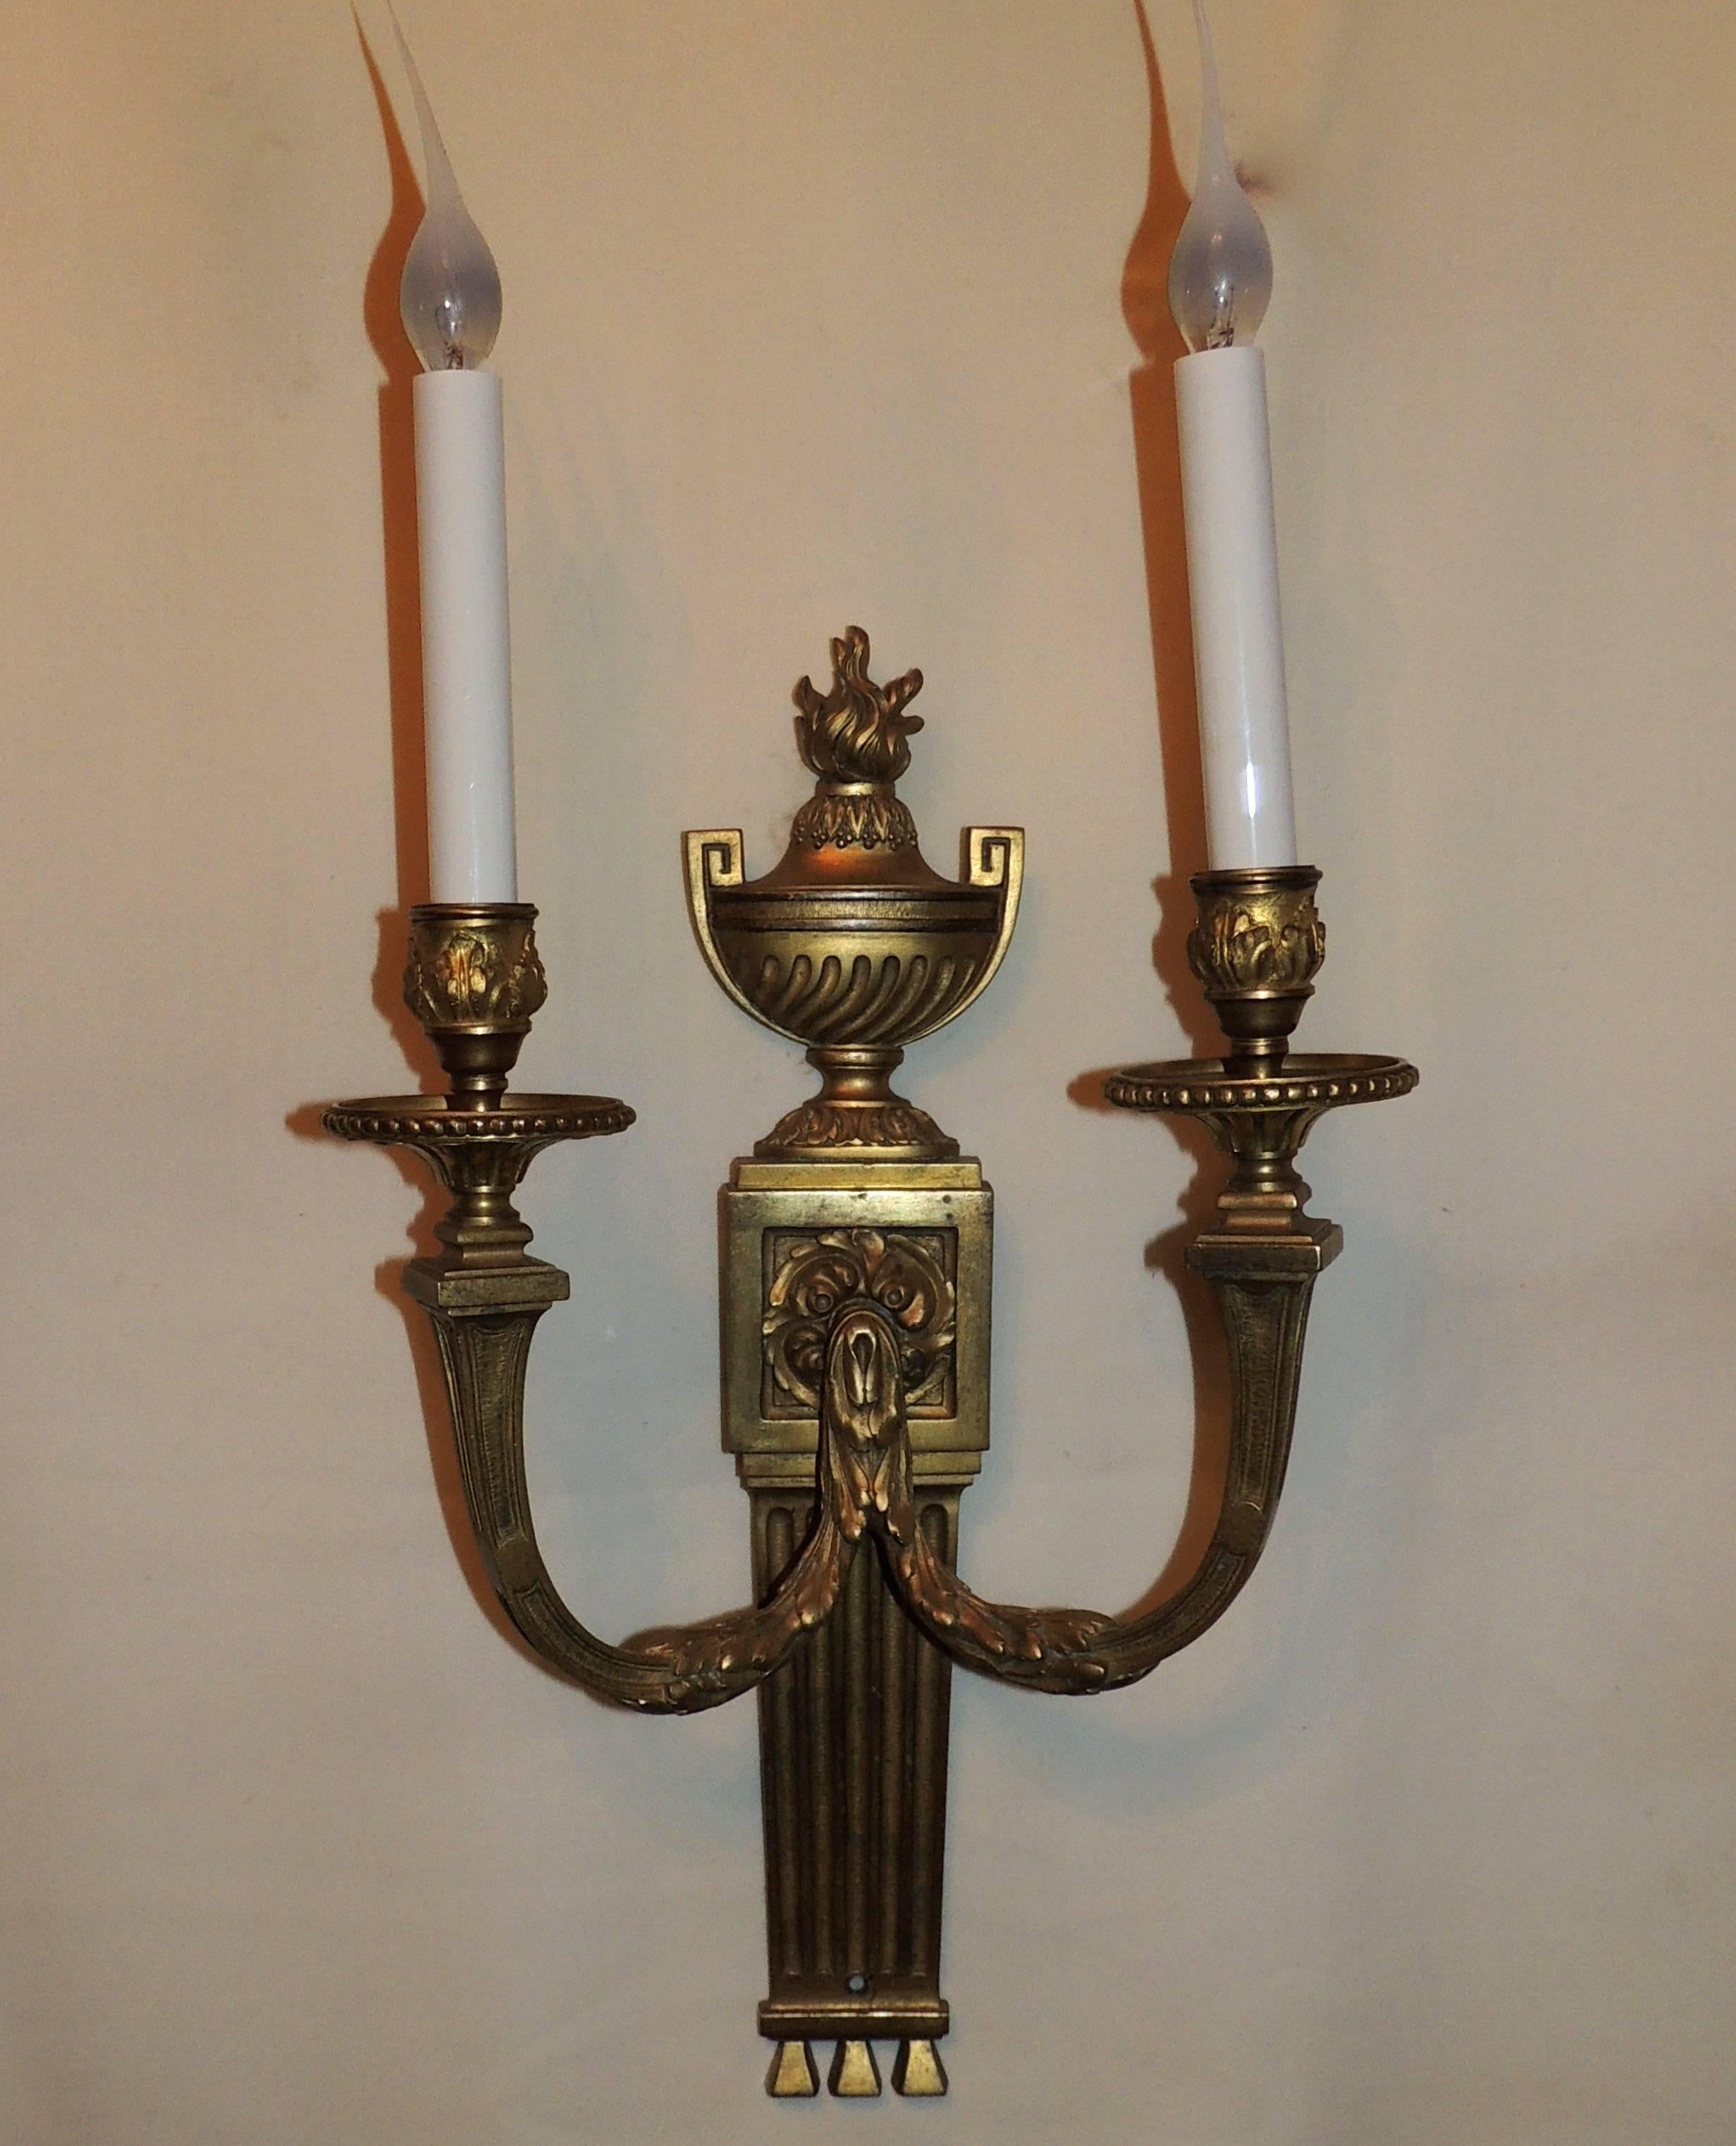 This wonderful elegant pair of doré bronze two-arm sconces by E. F. Caldwell Co. are beautifully decorated throughout. From the urn and flame at the top to the rosette in the mid section, the fluted detail on the underside of the cups and the